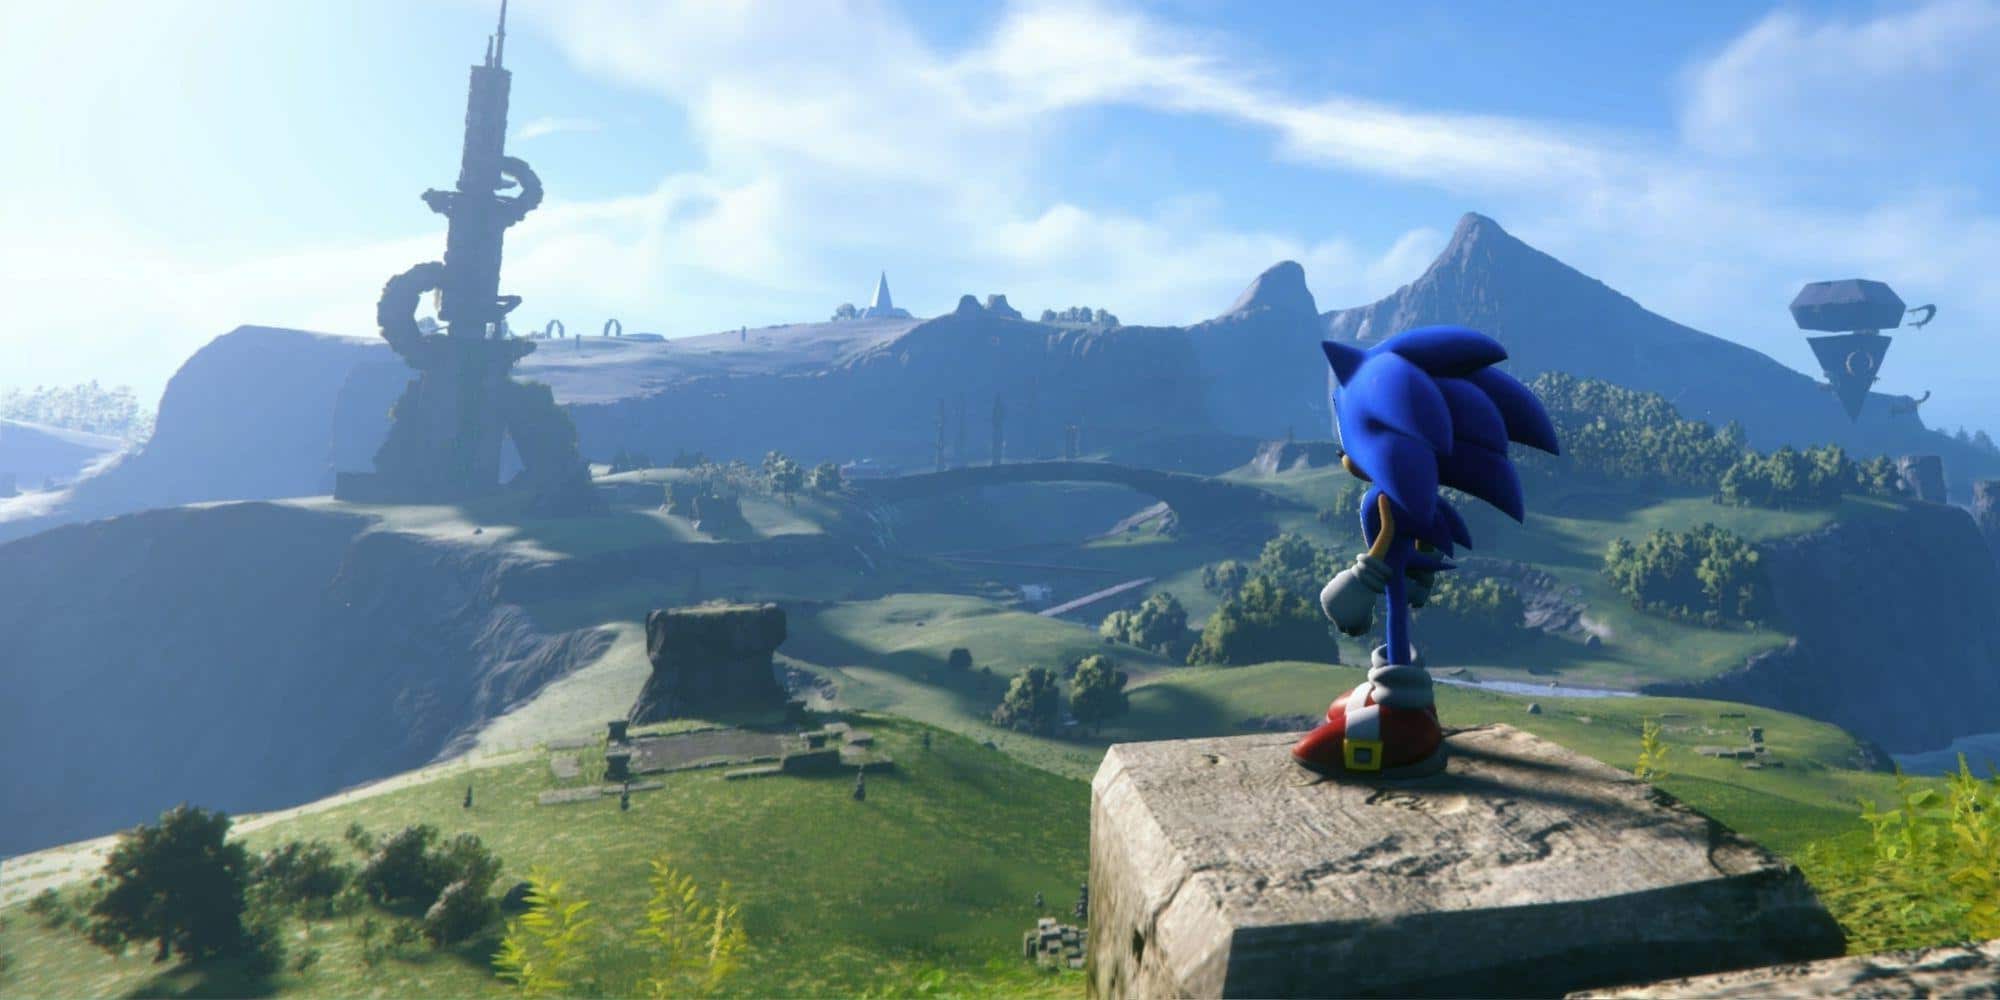 SEGA postponed Sonic Frontiers to “further refine” the quality